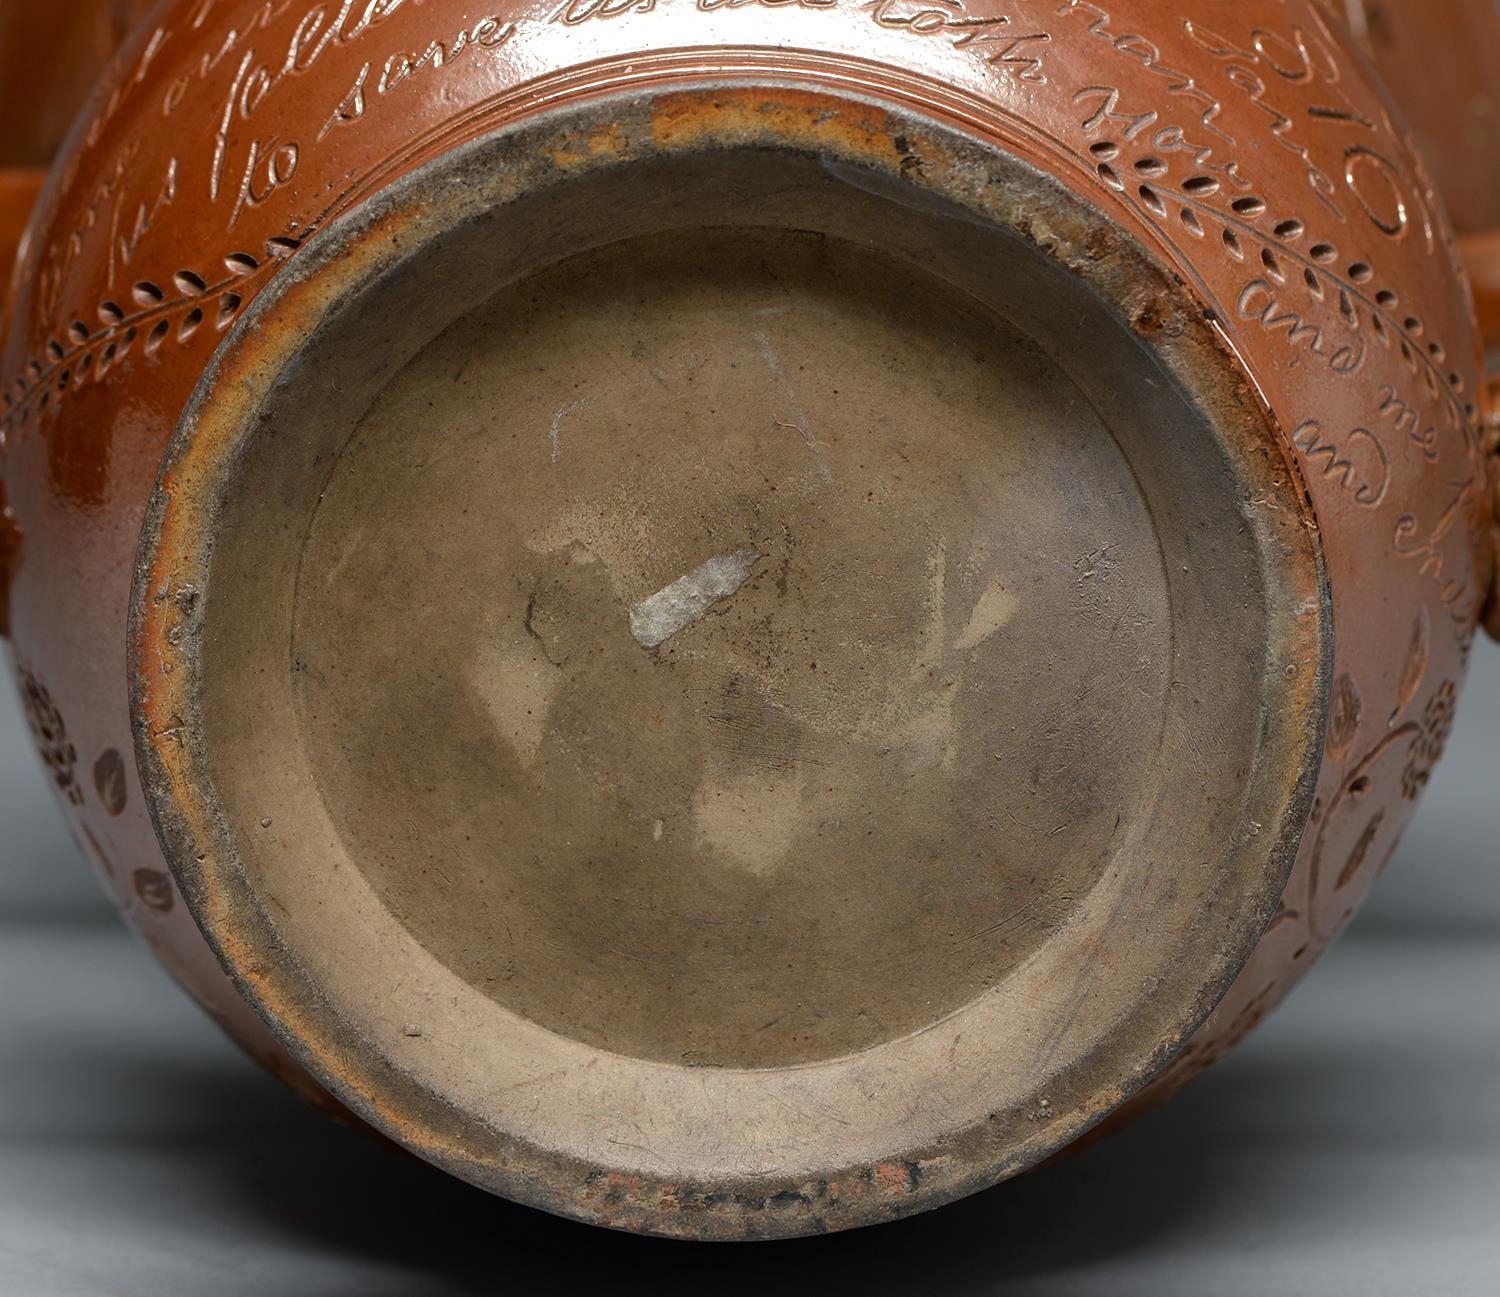 A Derbyshire saltglazed brown stoneware loving cup, Chesterfield, dated 1816, incised JAMES AND - Image 2 of 2